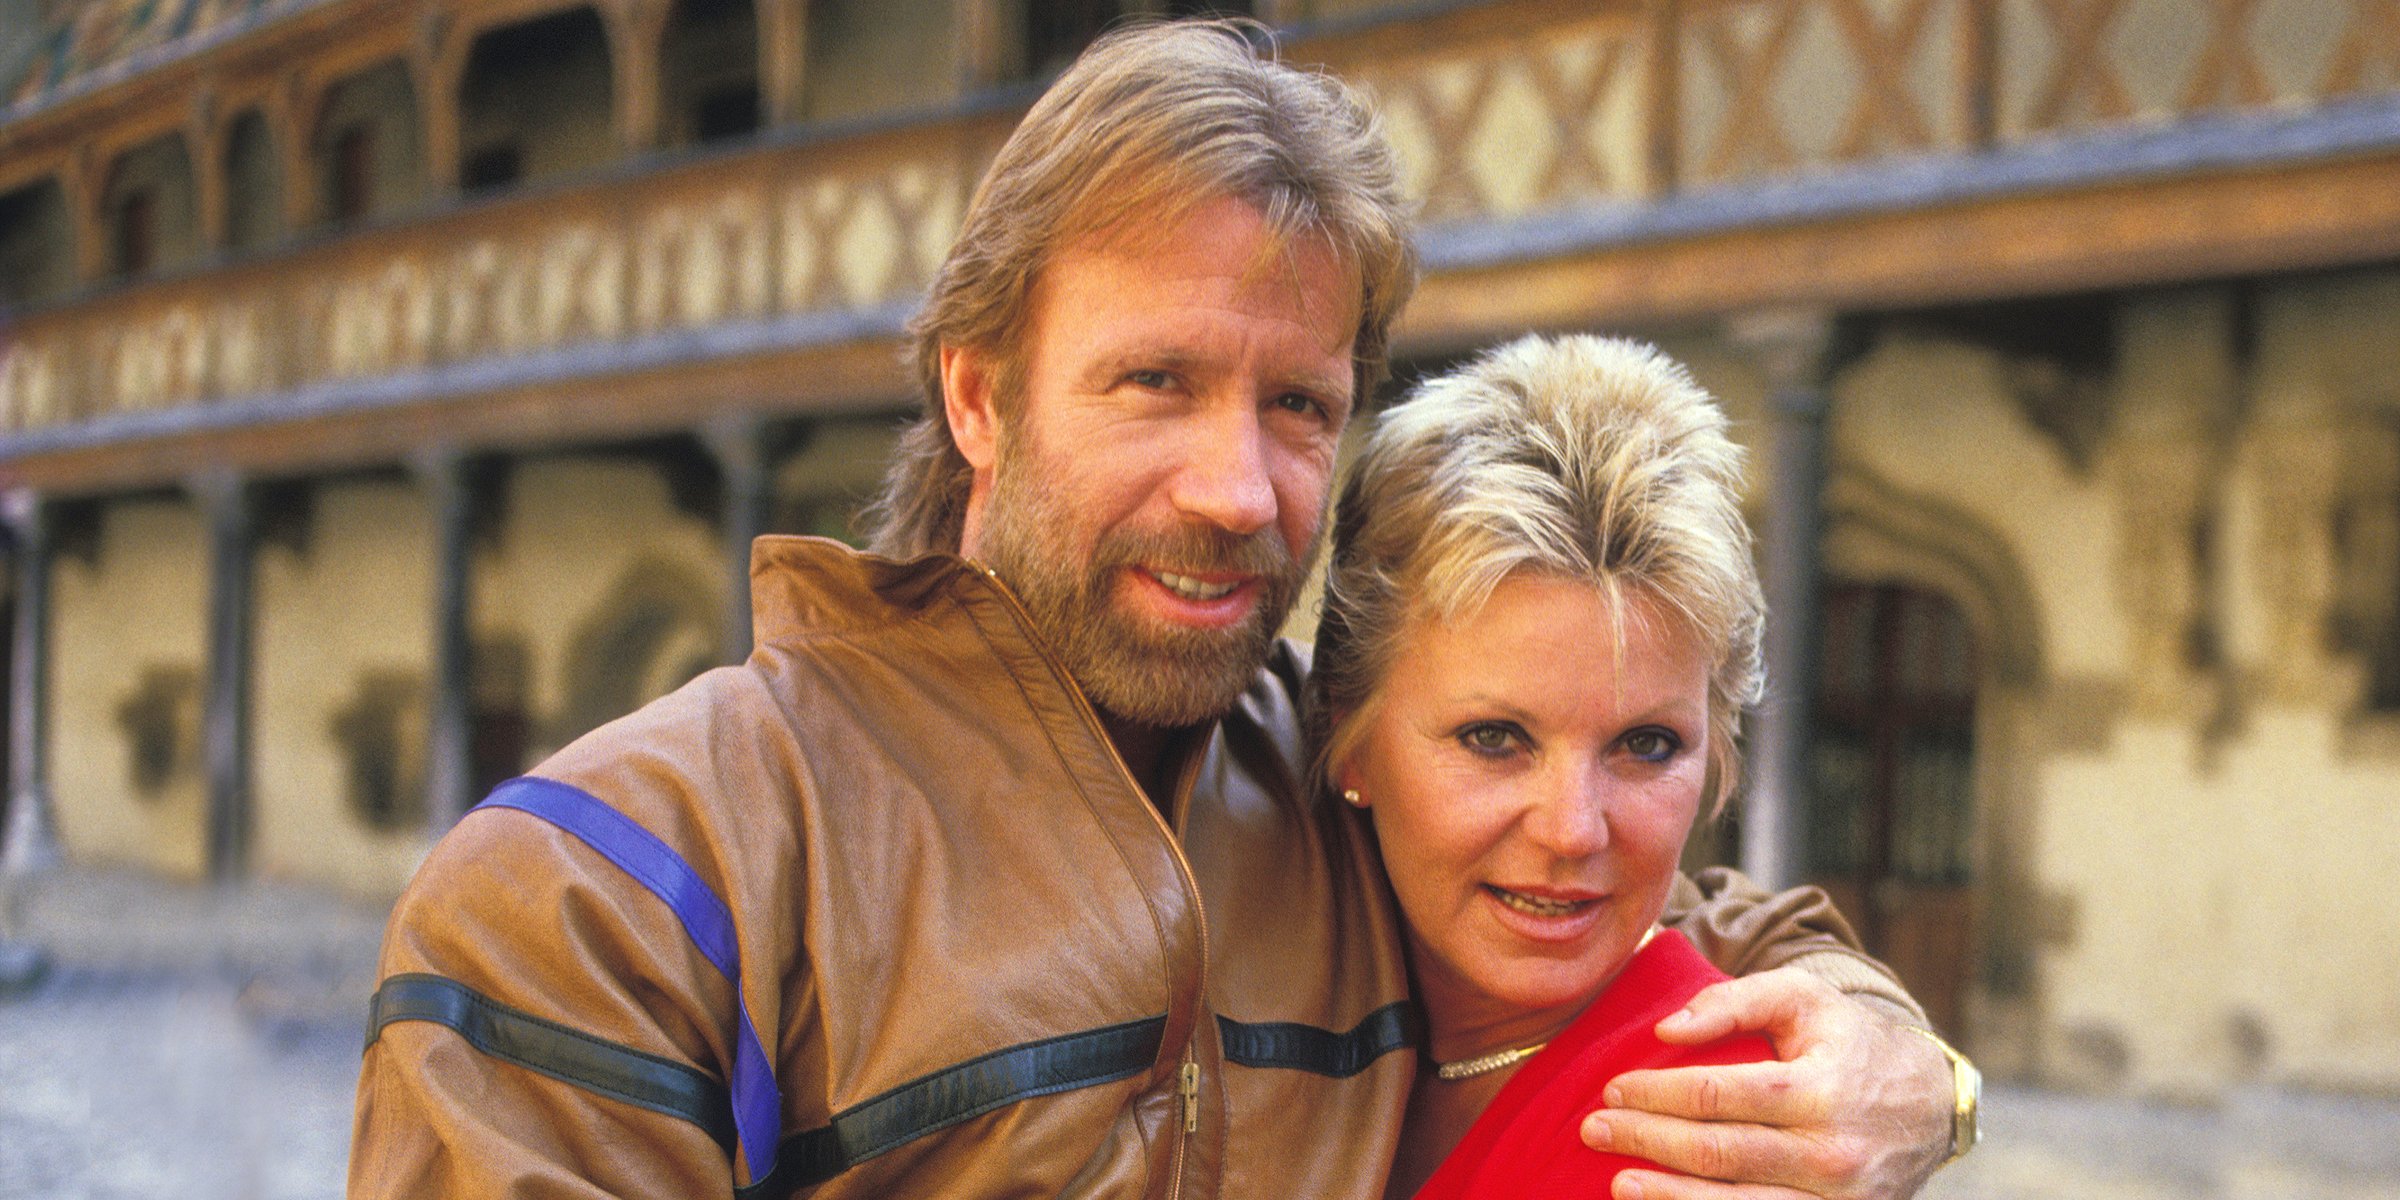 Chuck Norris and Dianne Holechek | Source: Getty Images